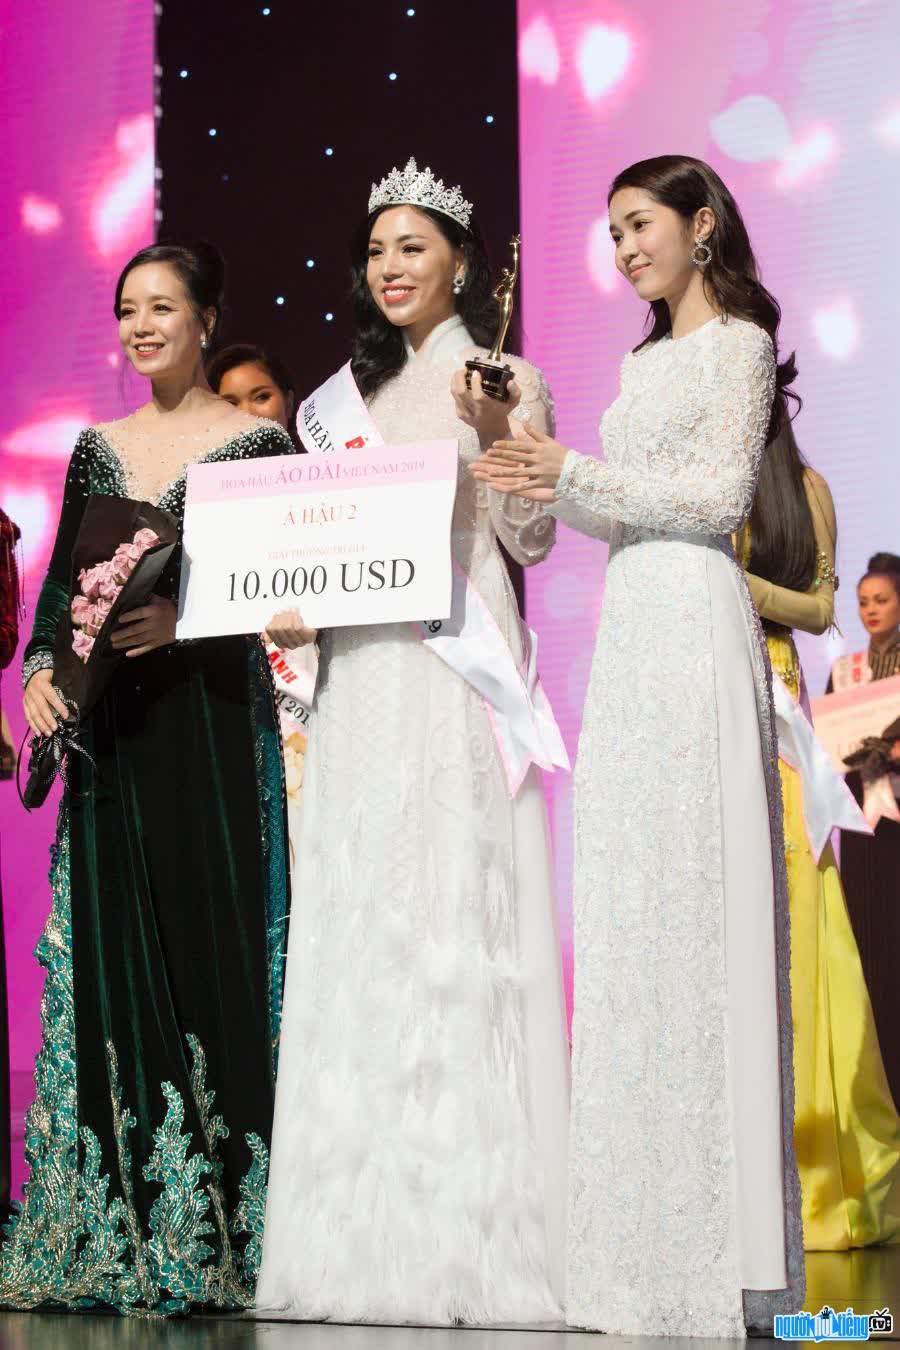 Nguyen Thu Huong was crowned 2nd runner-up of Miss Ao Dai 2019 contest